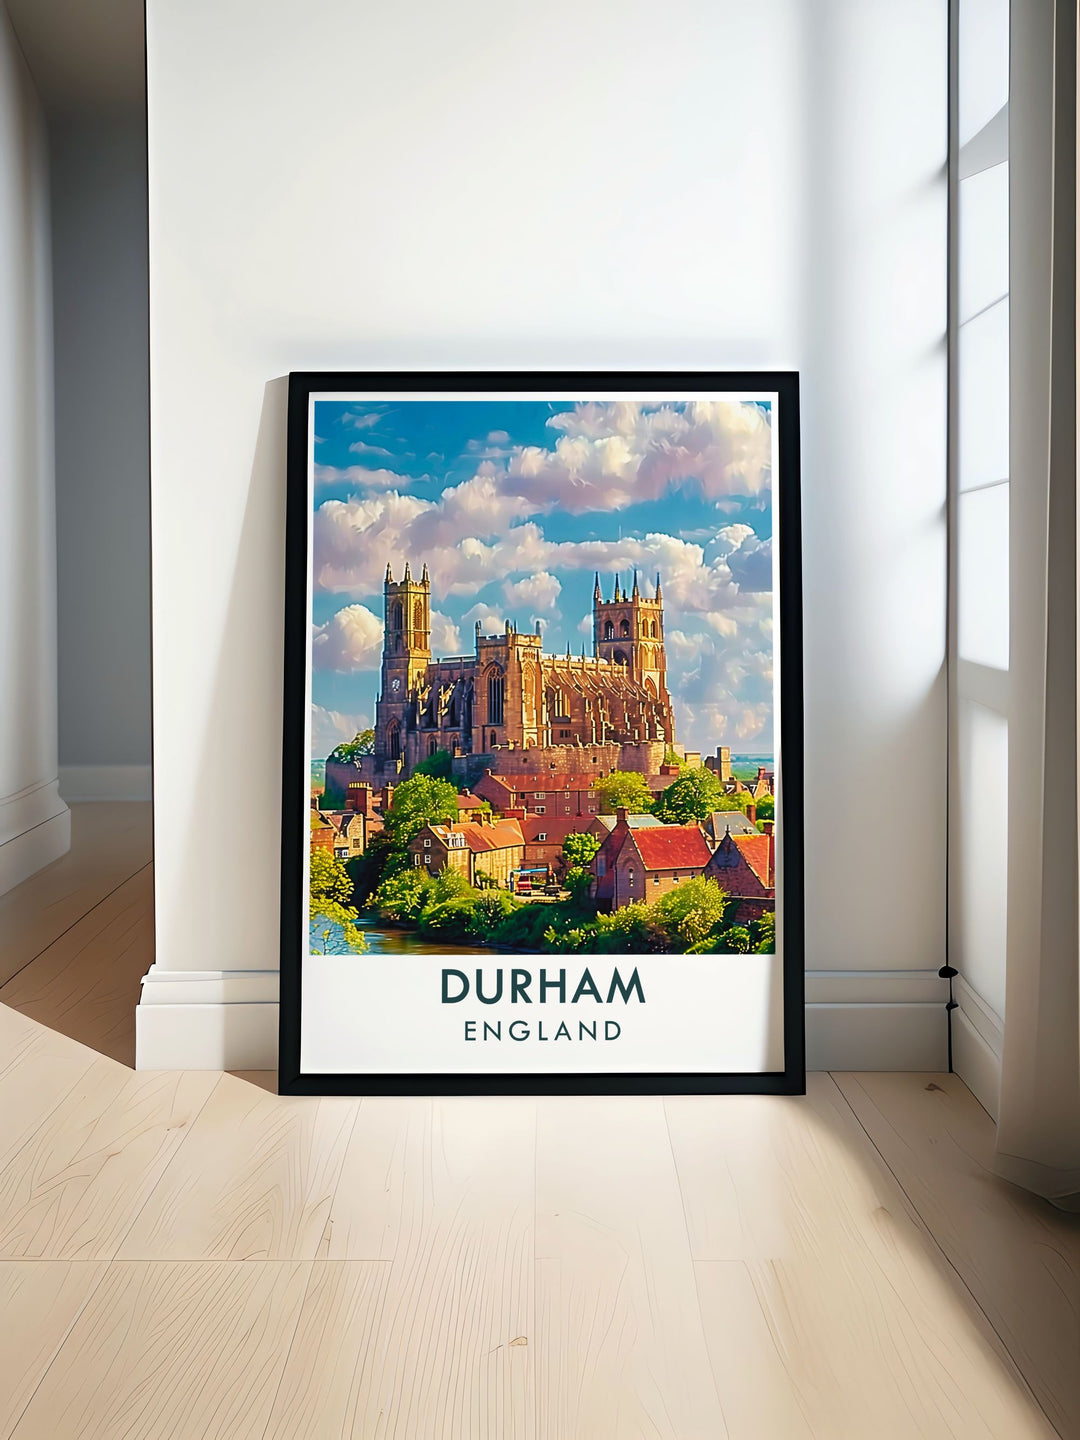 Durhams rich history and architectural grandeur are celebrated in this poster, featuring the iconic Durham Cathedral and inviting you to explore its magnificent structure.